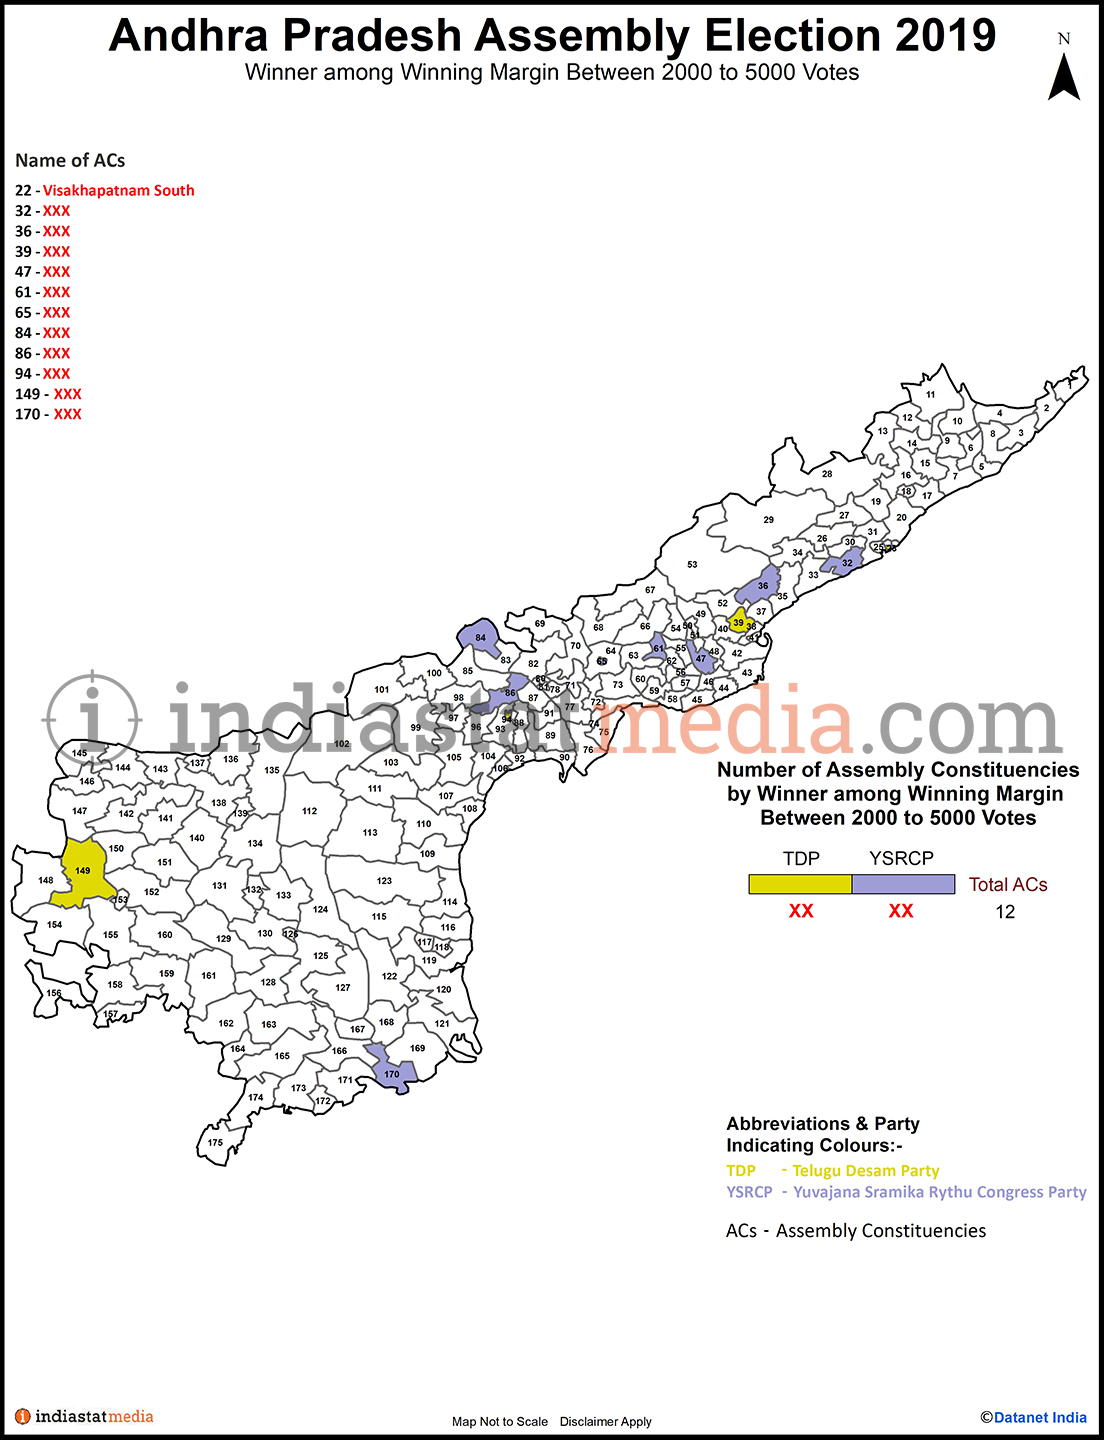 Winner among Winning Margin Between 2000 to 5000 Votes in Andhra Pradesh (Assembly Election - 2019)